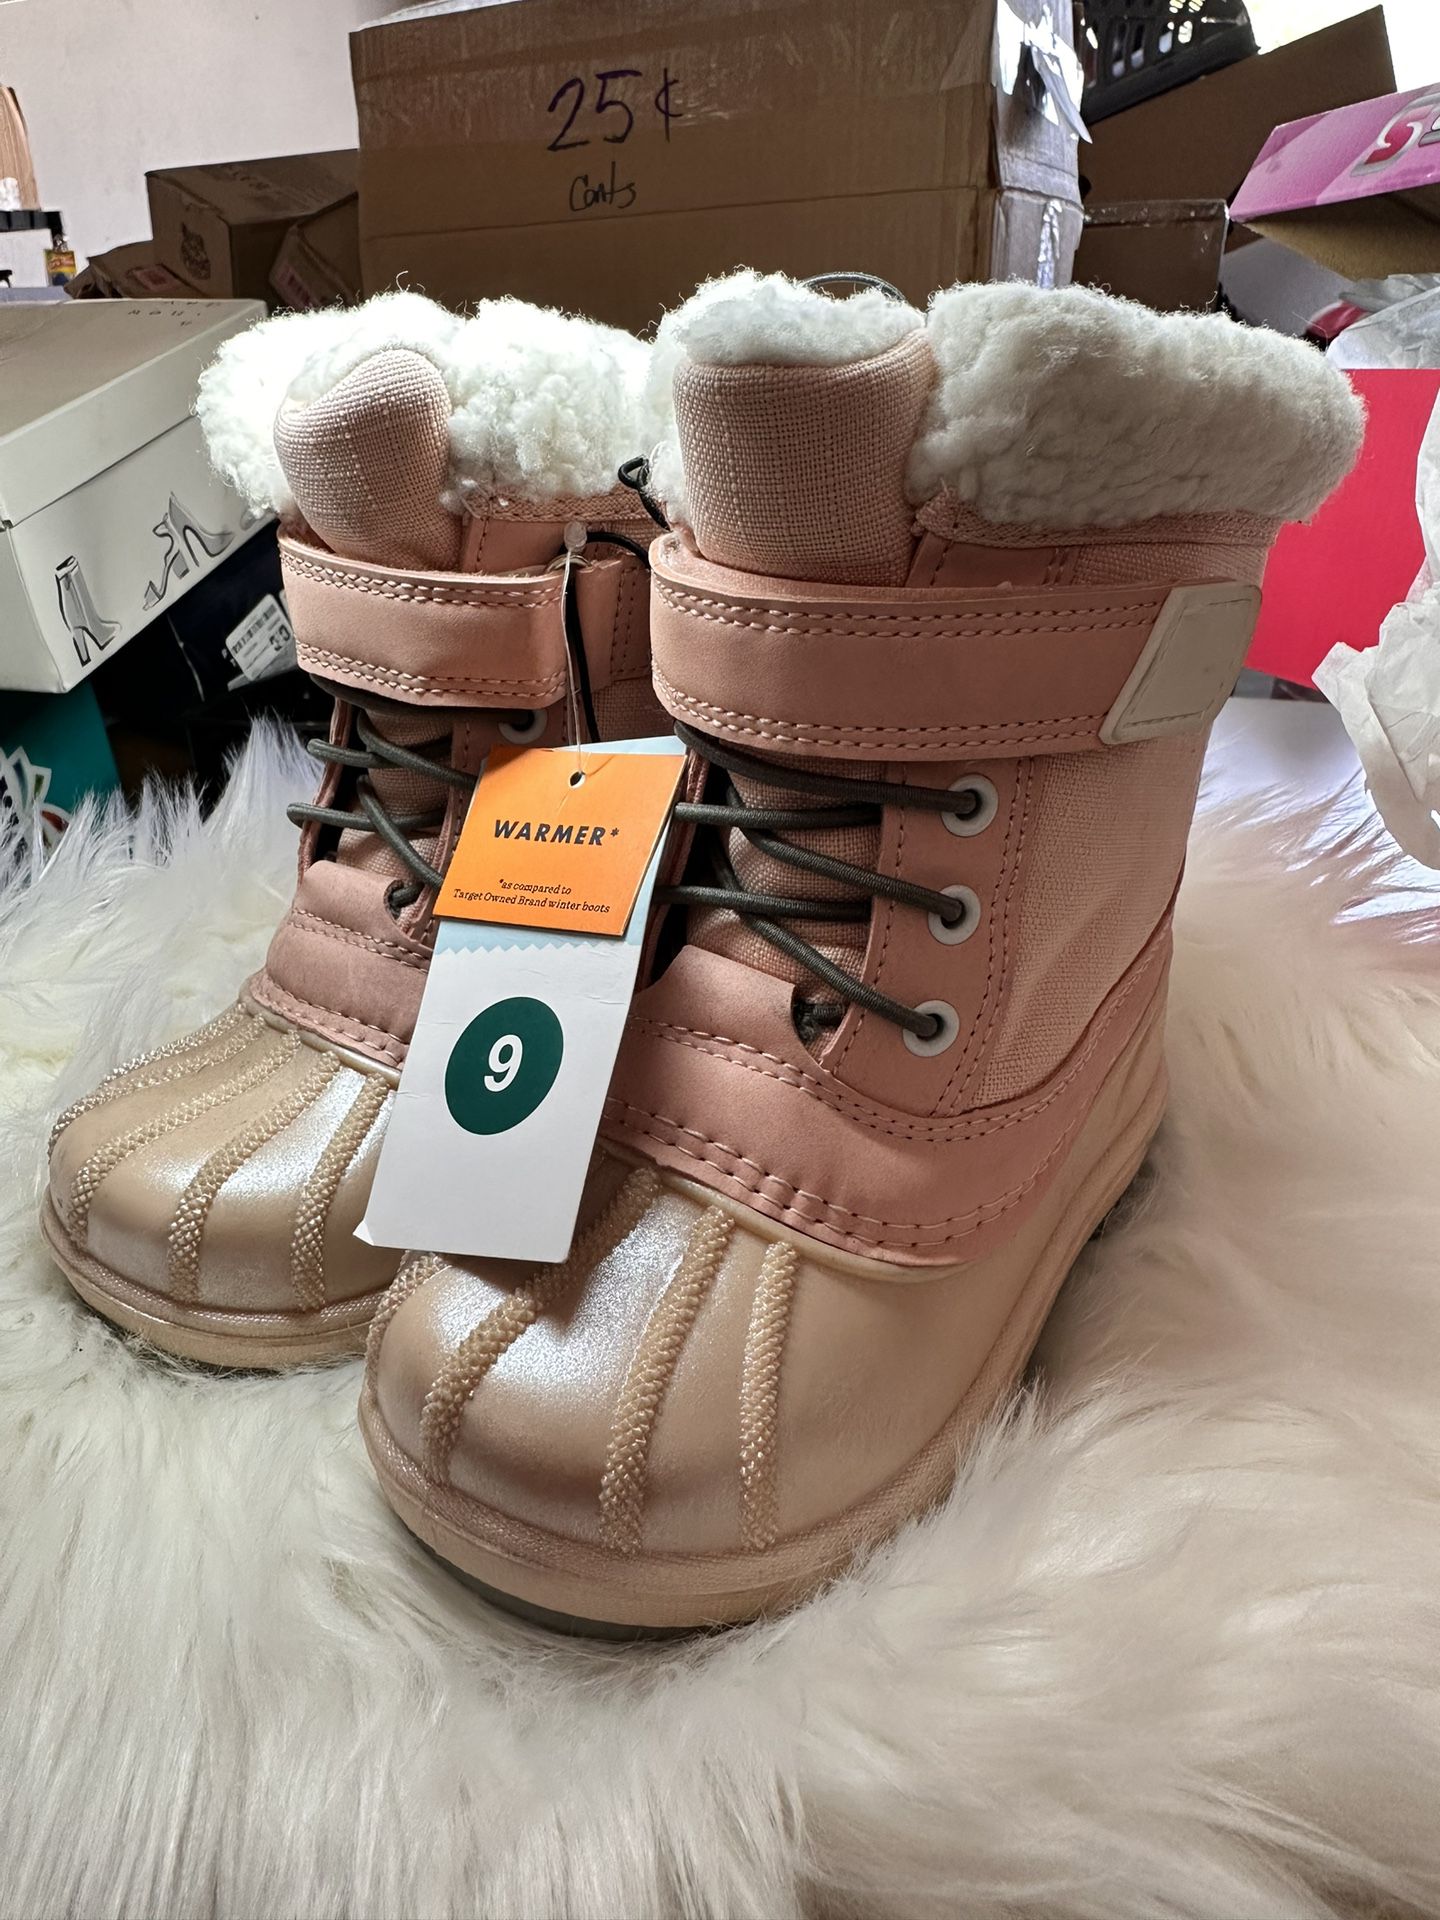 LV STAR TRAIL ANKLE BOOT for Sale in Laveen Village, AZ - OfferUp